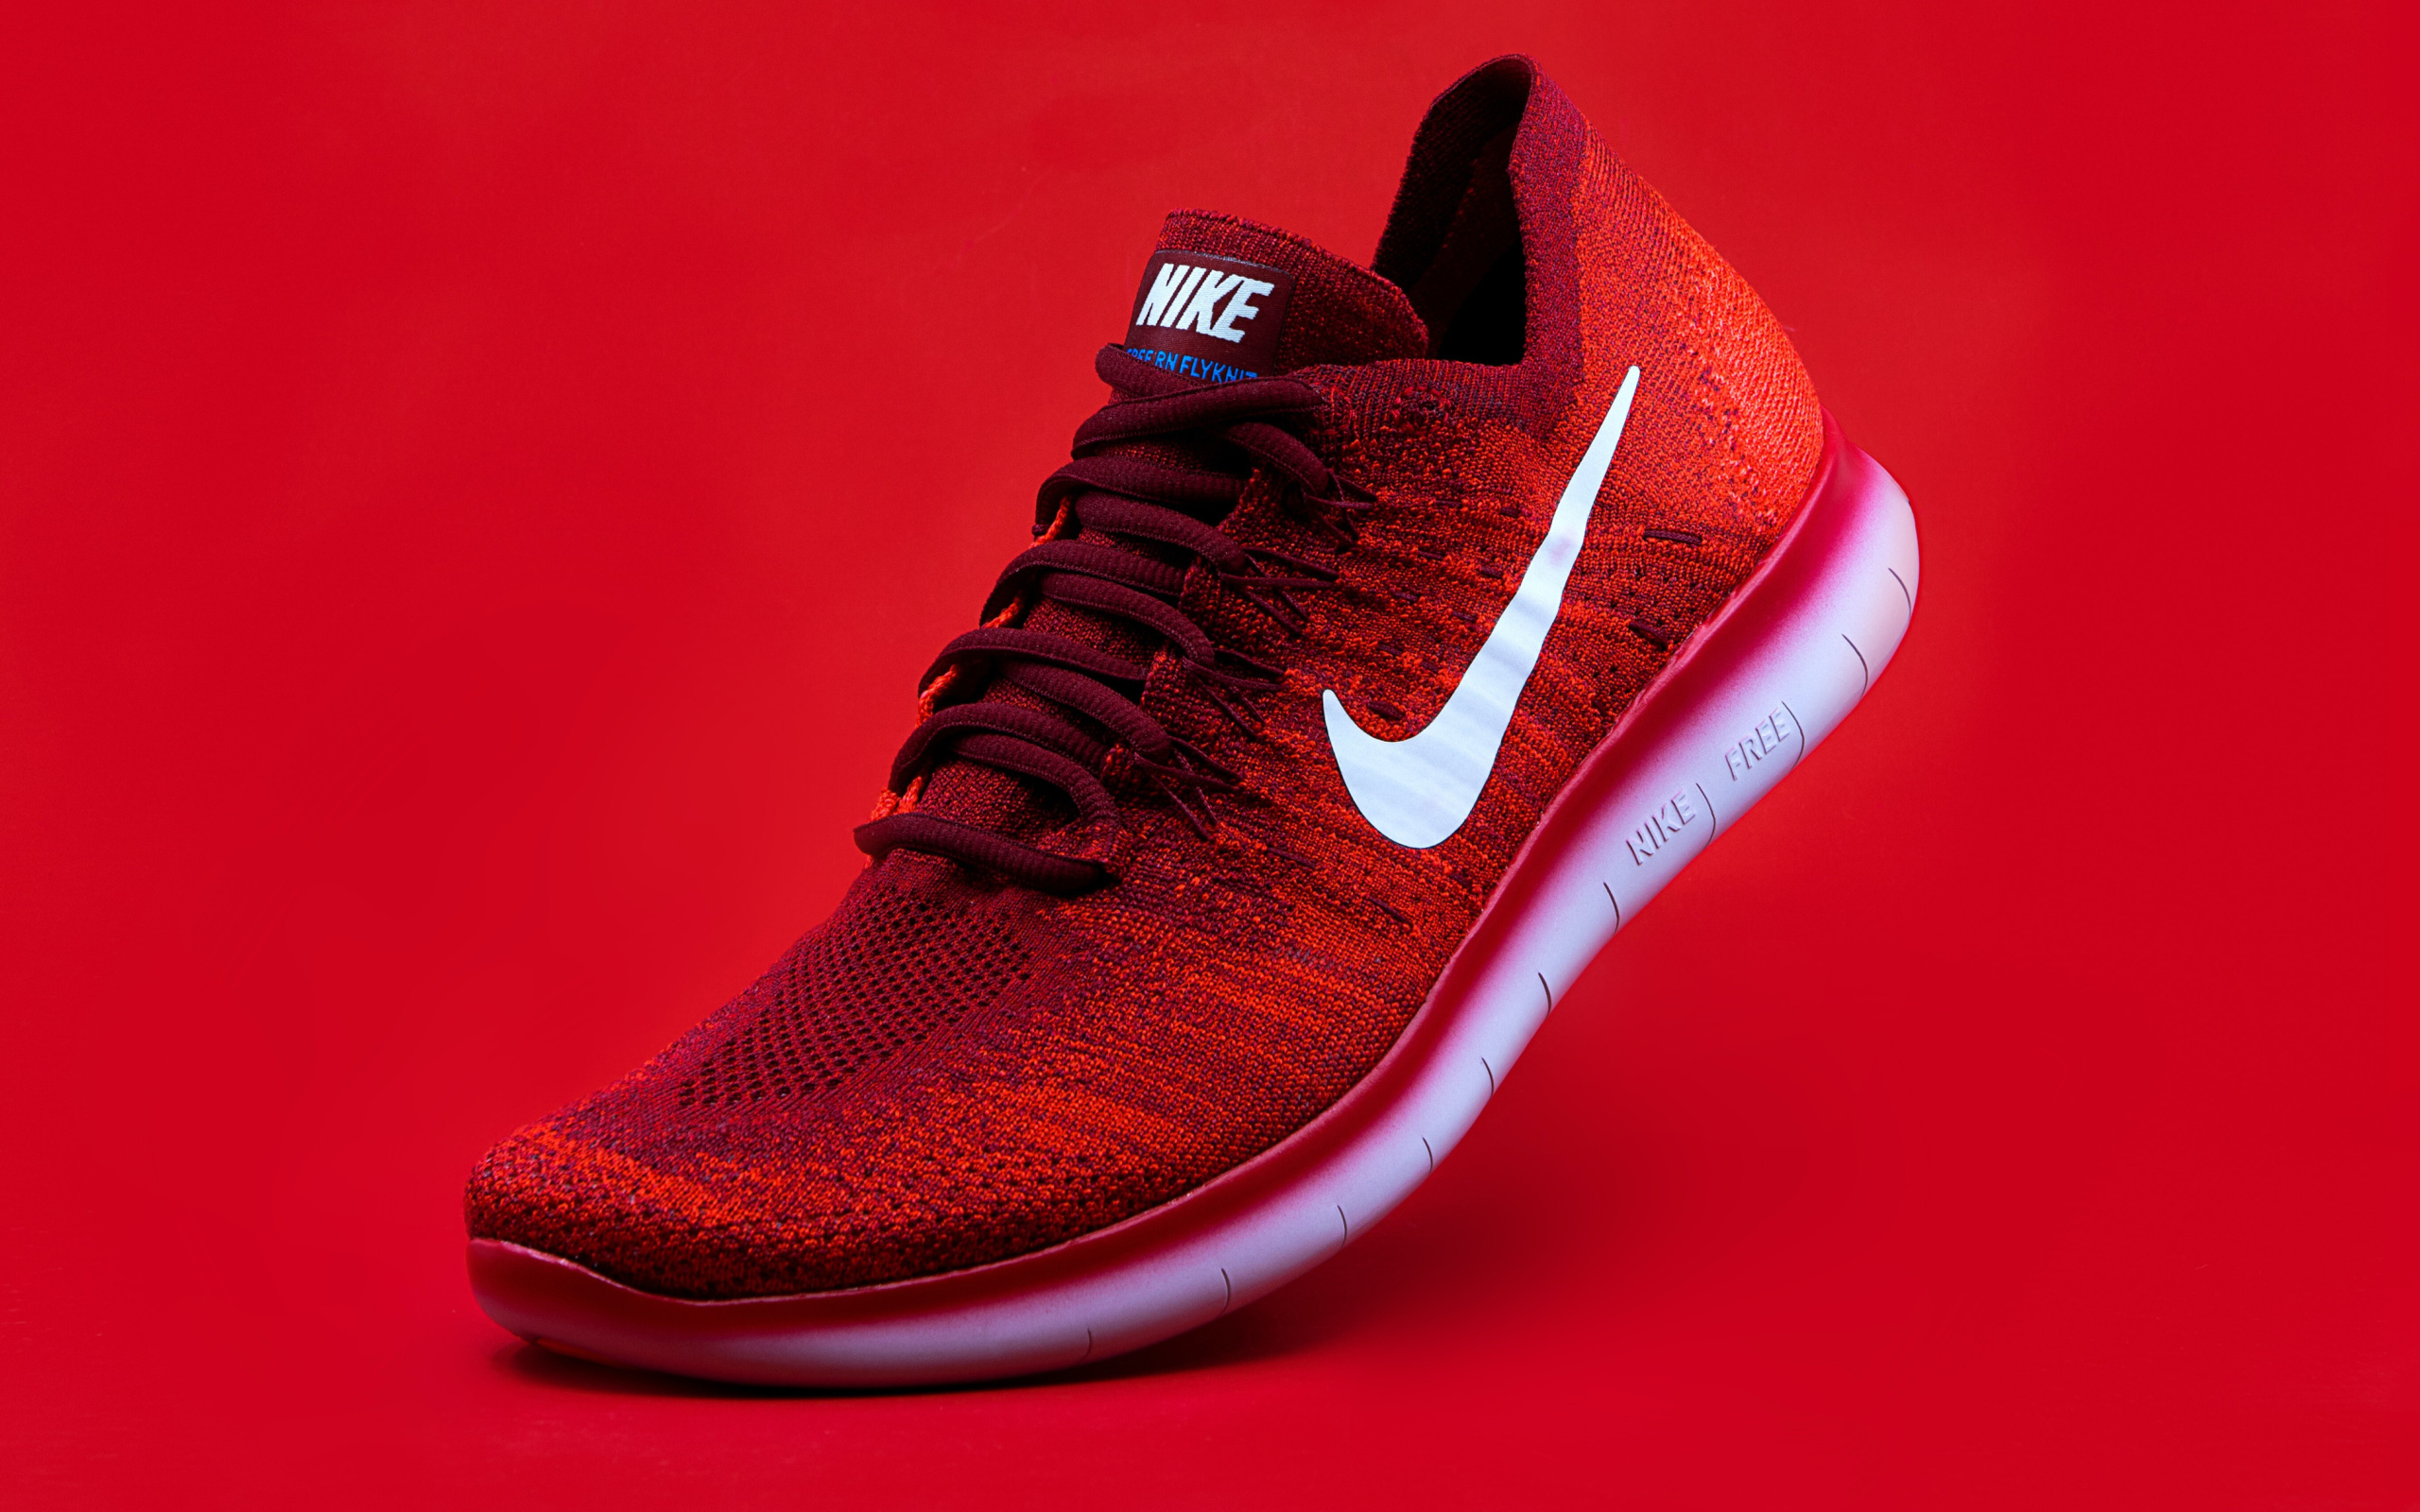 Red Nike Shoes wallpaper 2560x1600